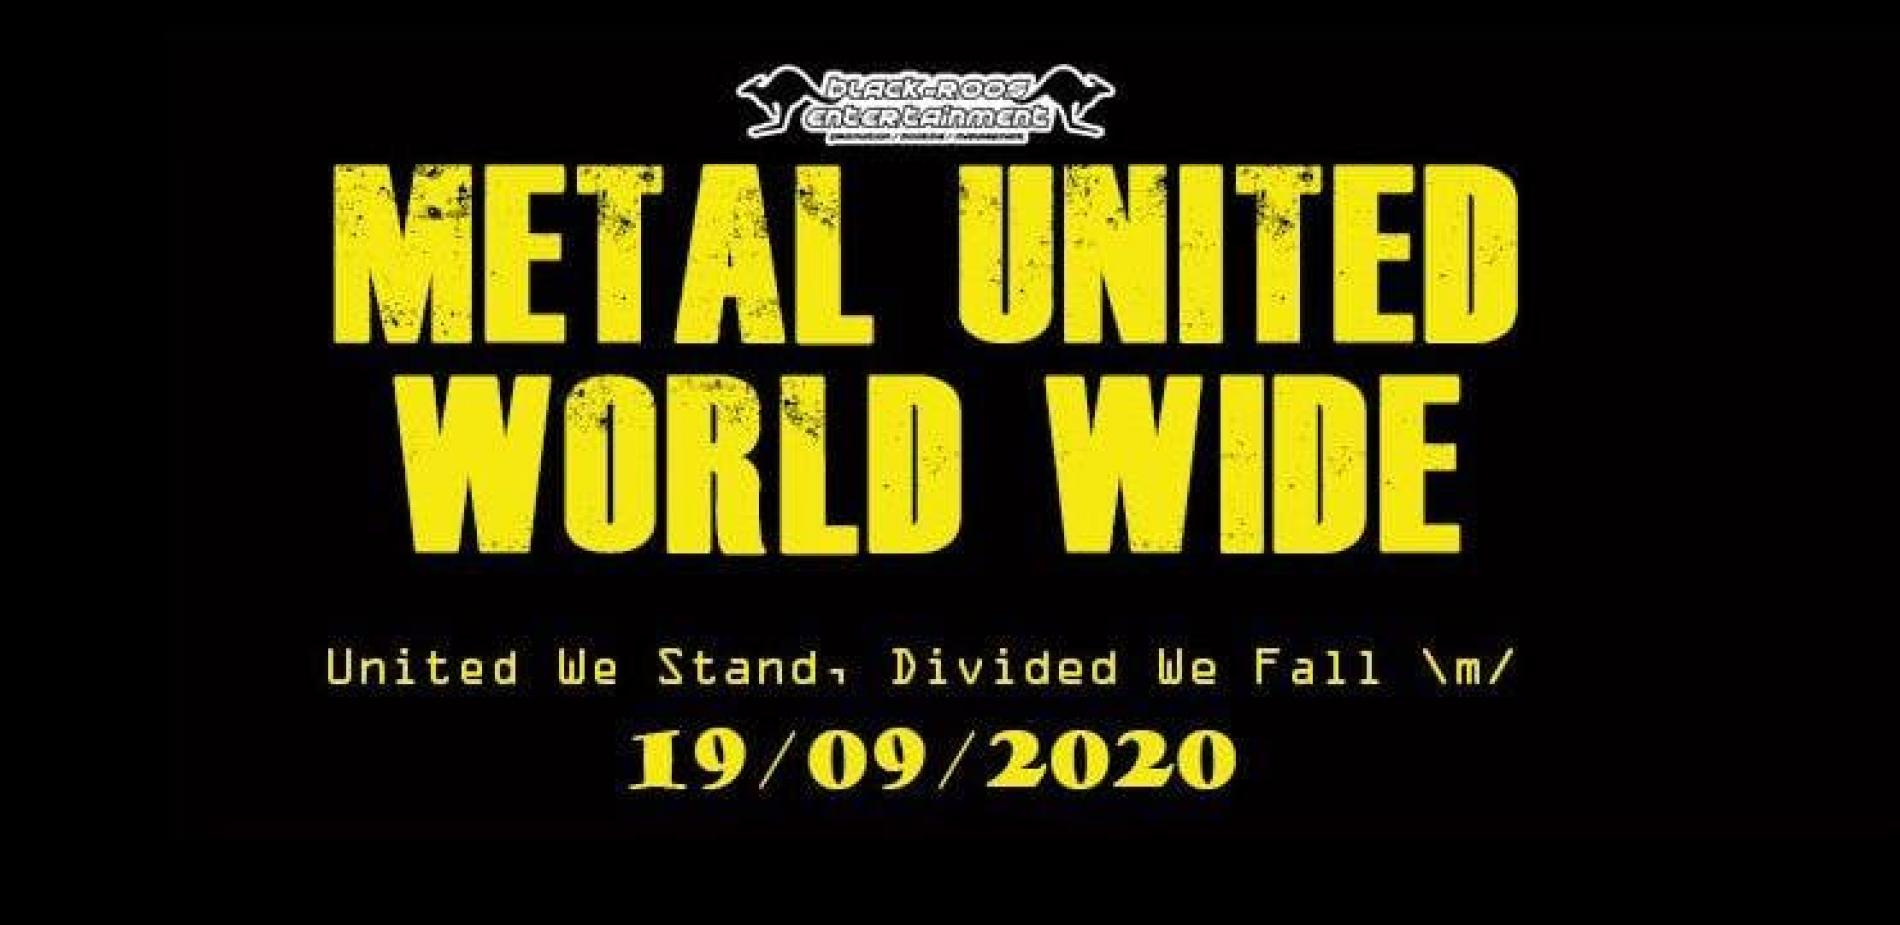 Sri Lanka Added To The Line Up Of Metal United World Wide